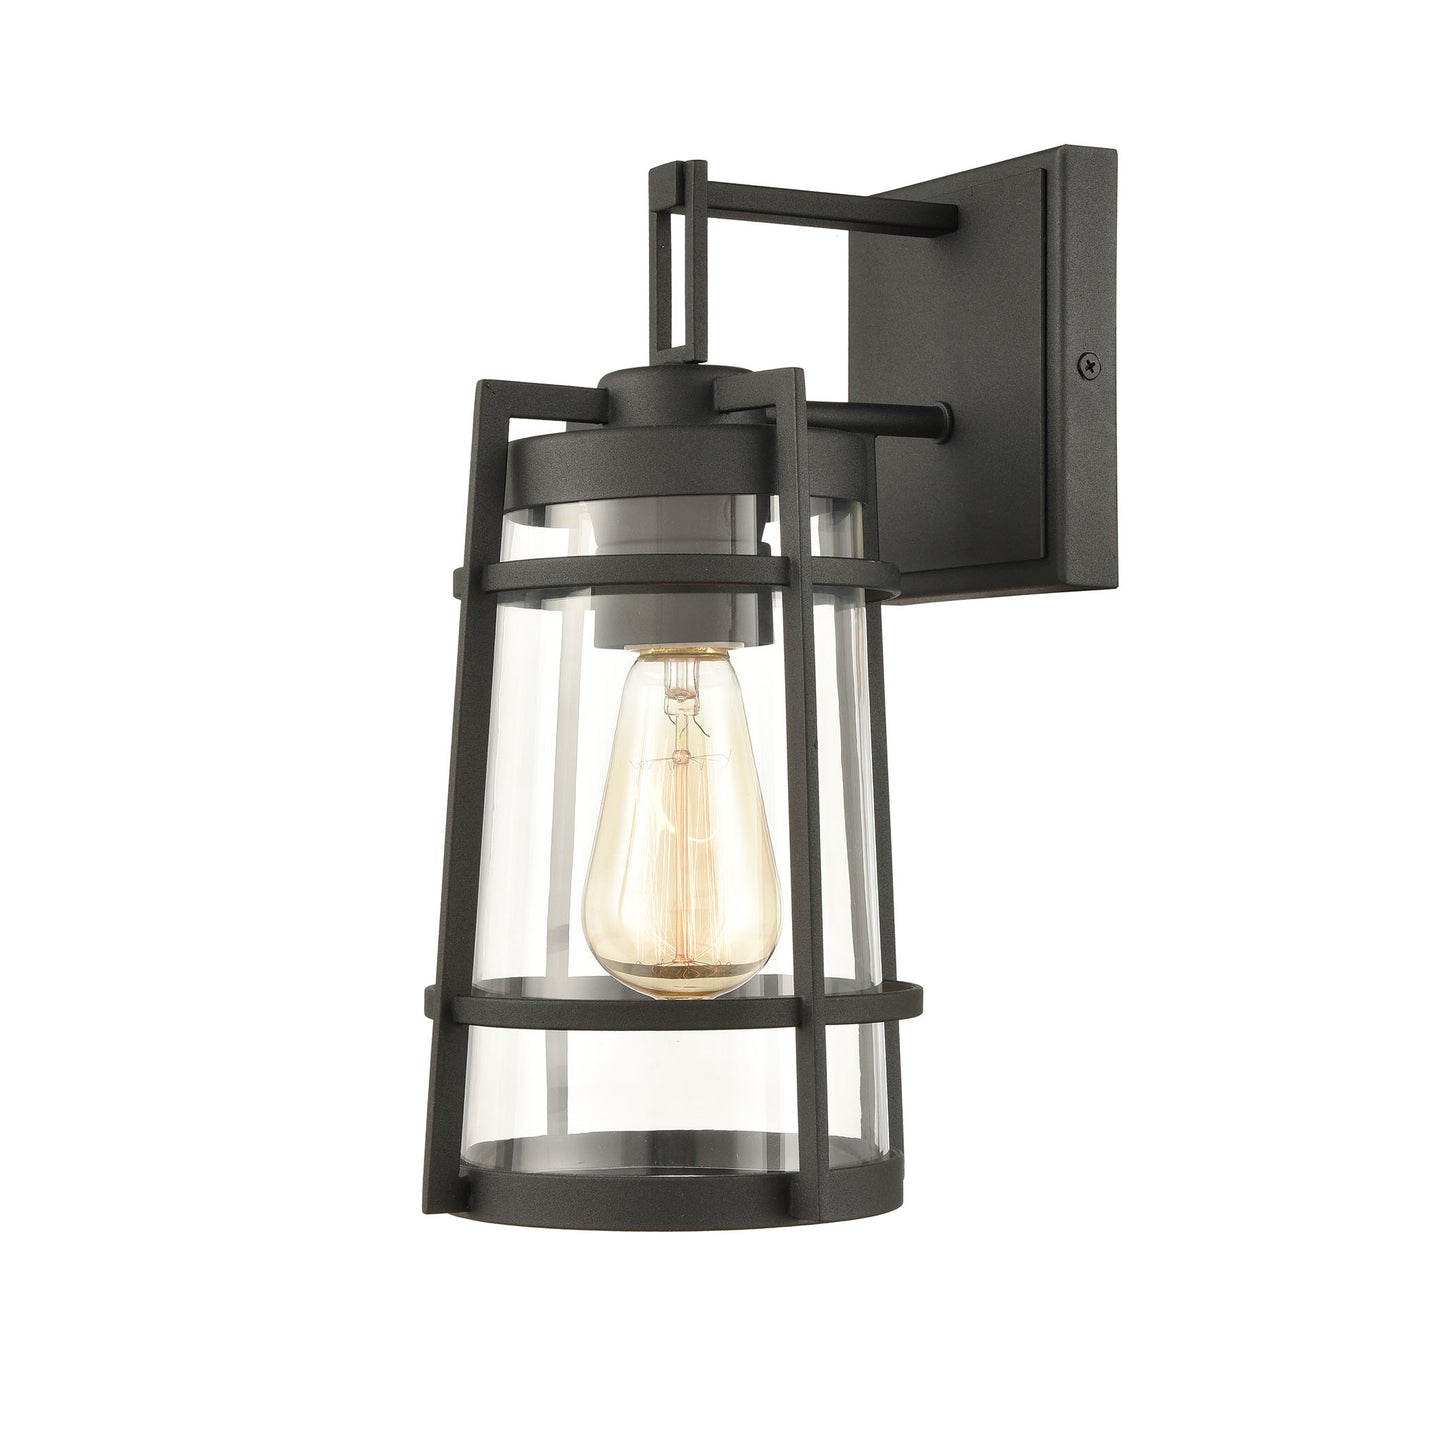 ELK Lighting 45490/1 - Crofton 7" Wide 1-Light Outdoor Sconce in Charcoal with Clear Glass